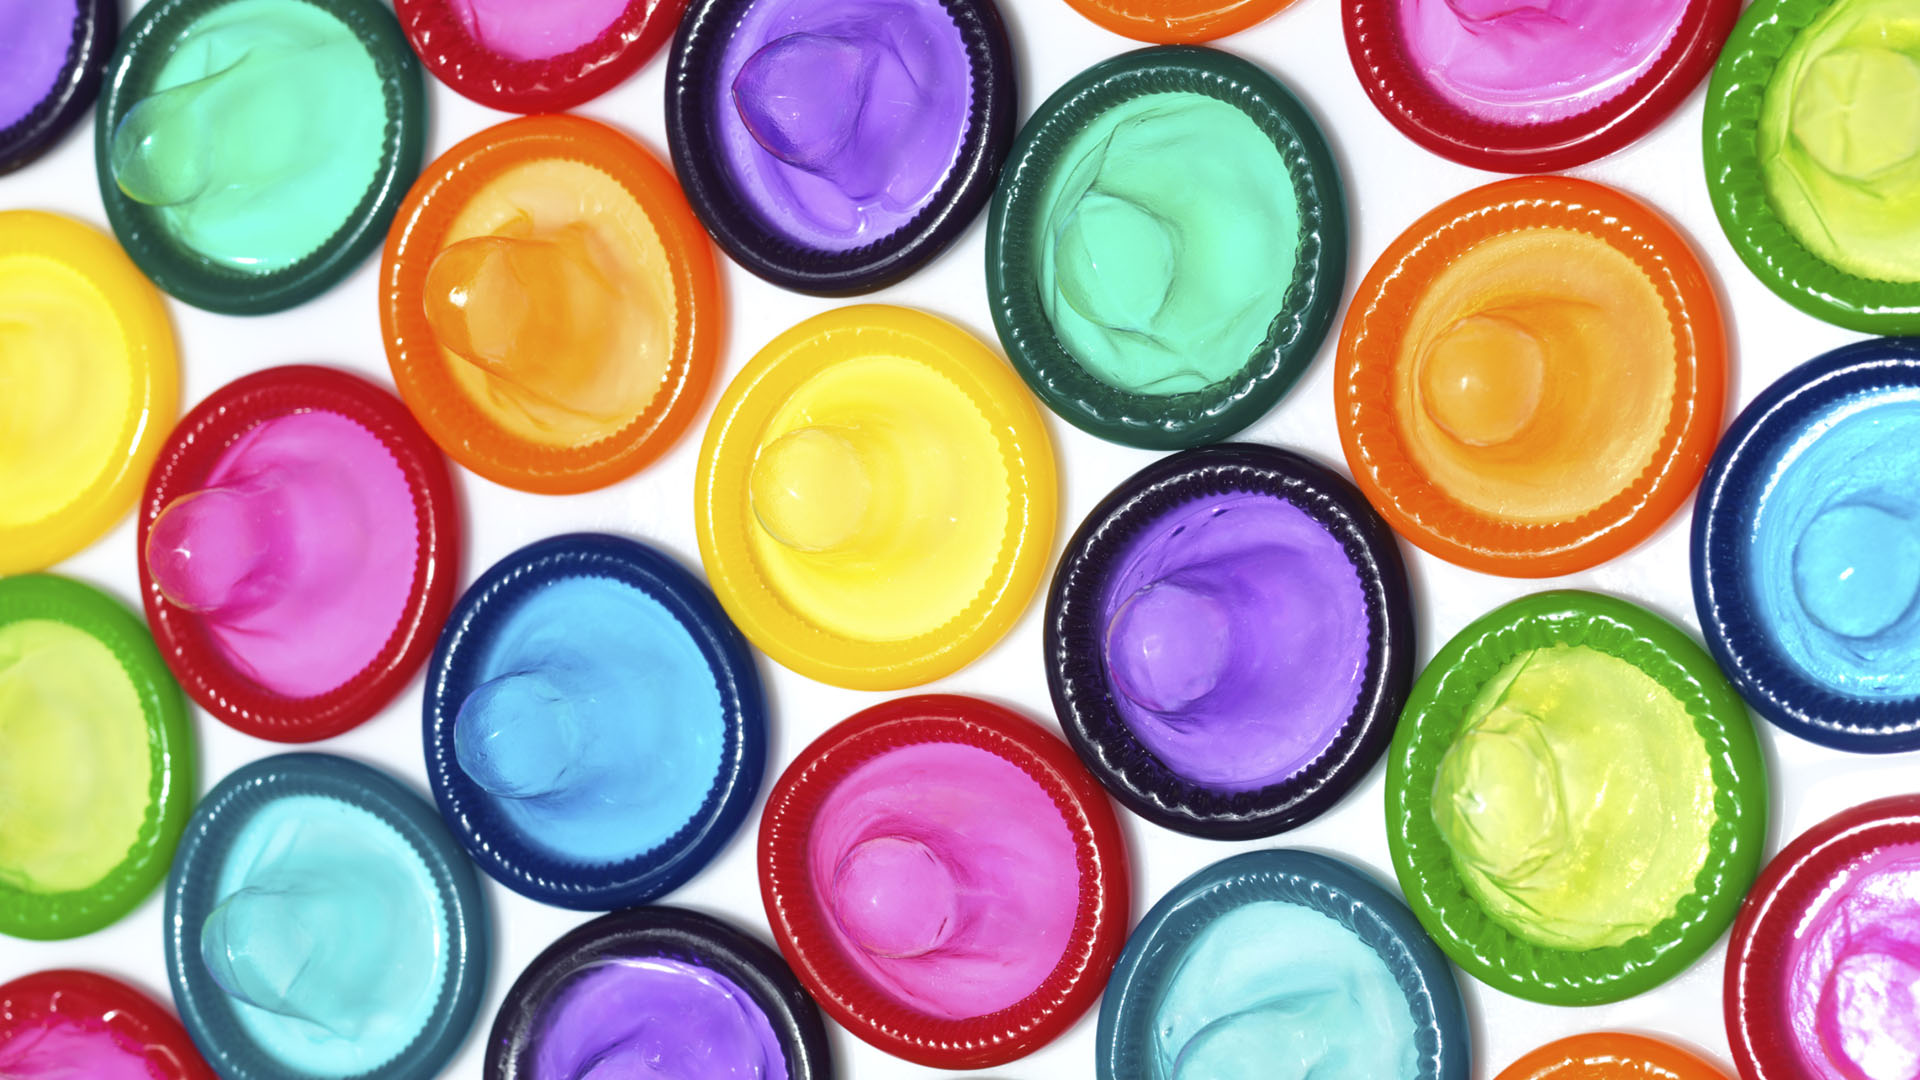 Condoms Filled With Gold Discovered In South Africa